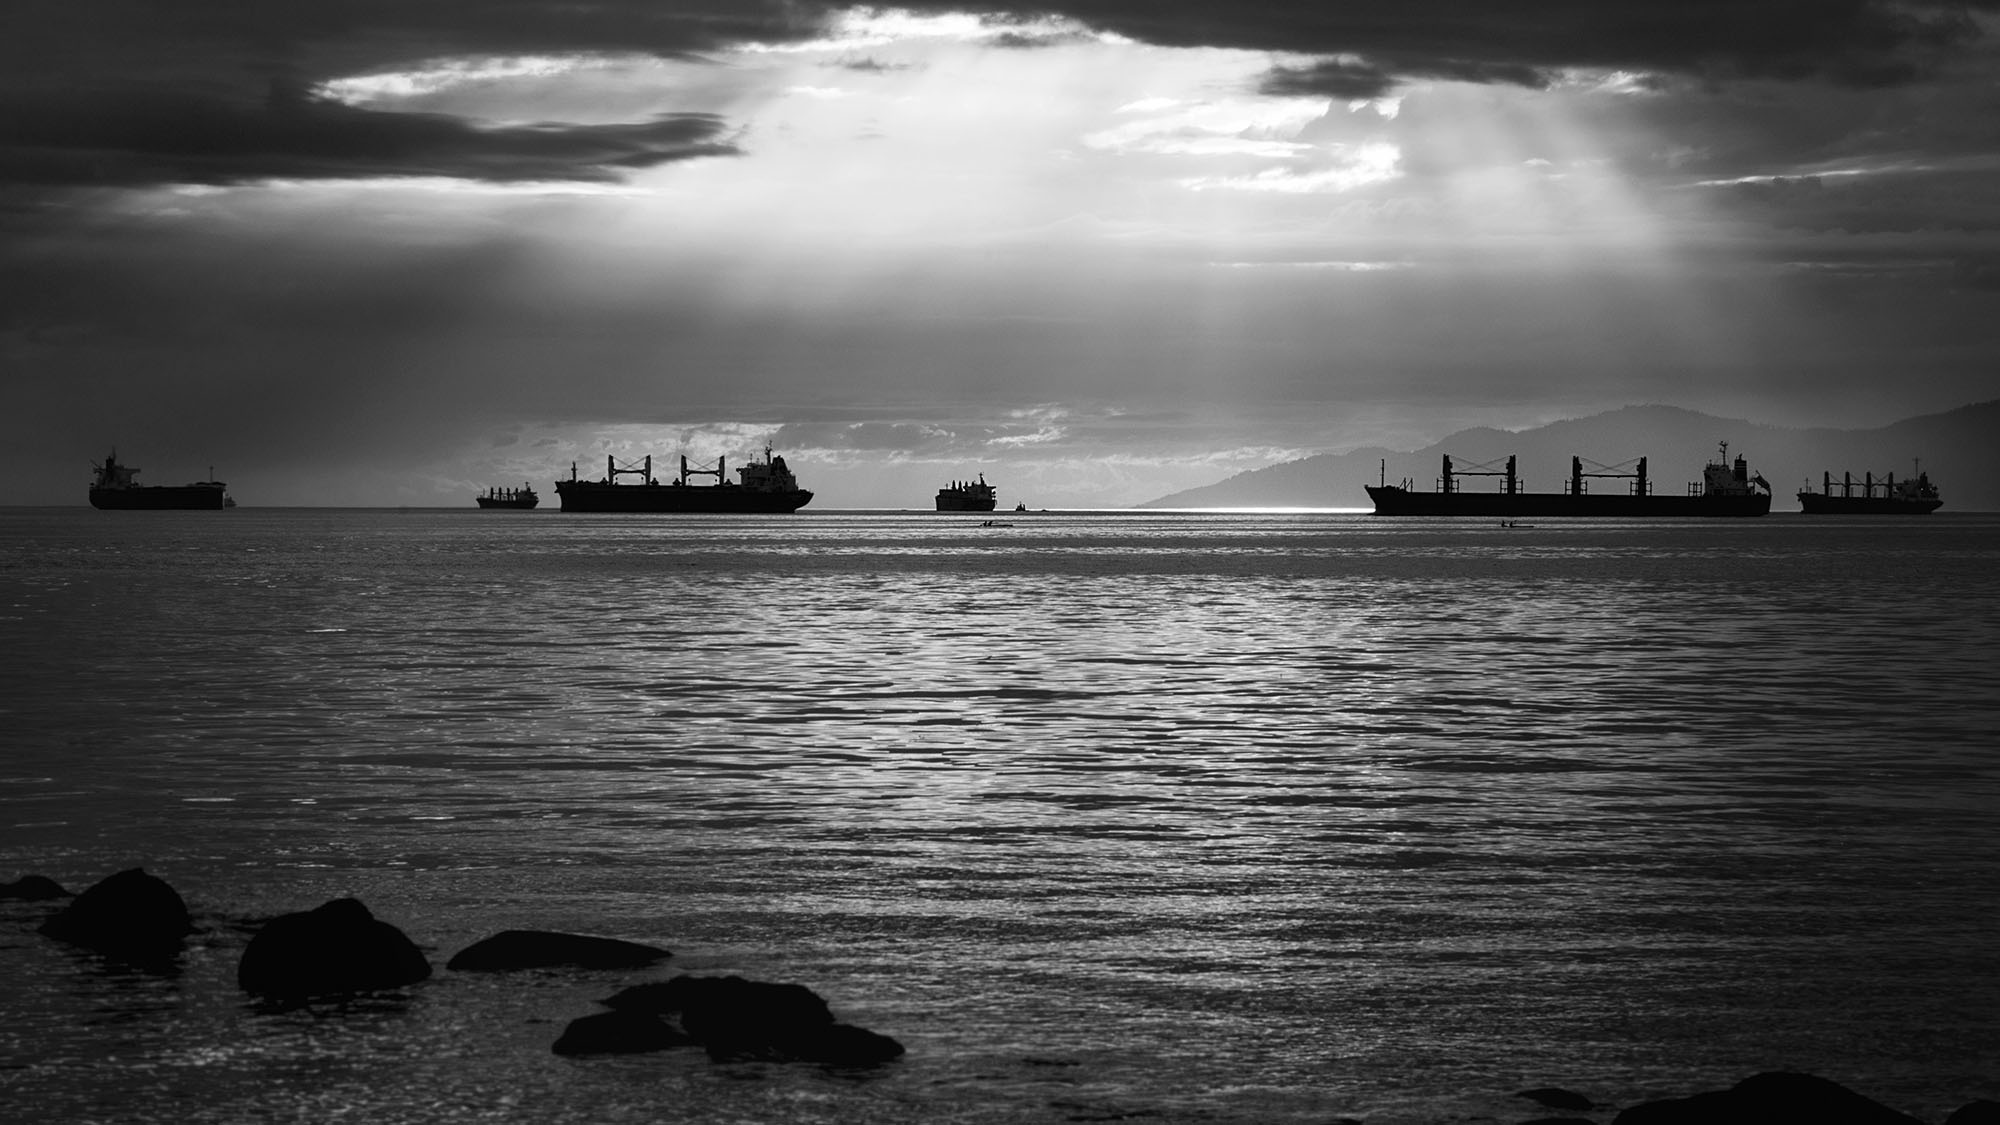 Black and white image of cargo ships in Burrard Inlet. Rays of light shine down from between clouds and Bowen Island is visible in the background.